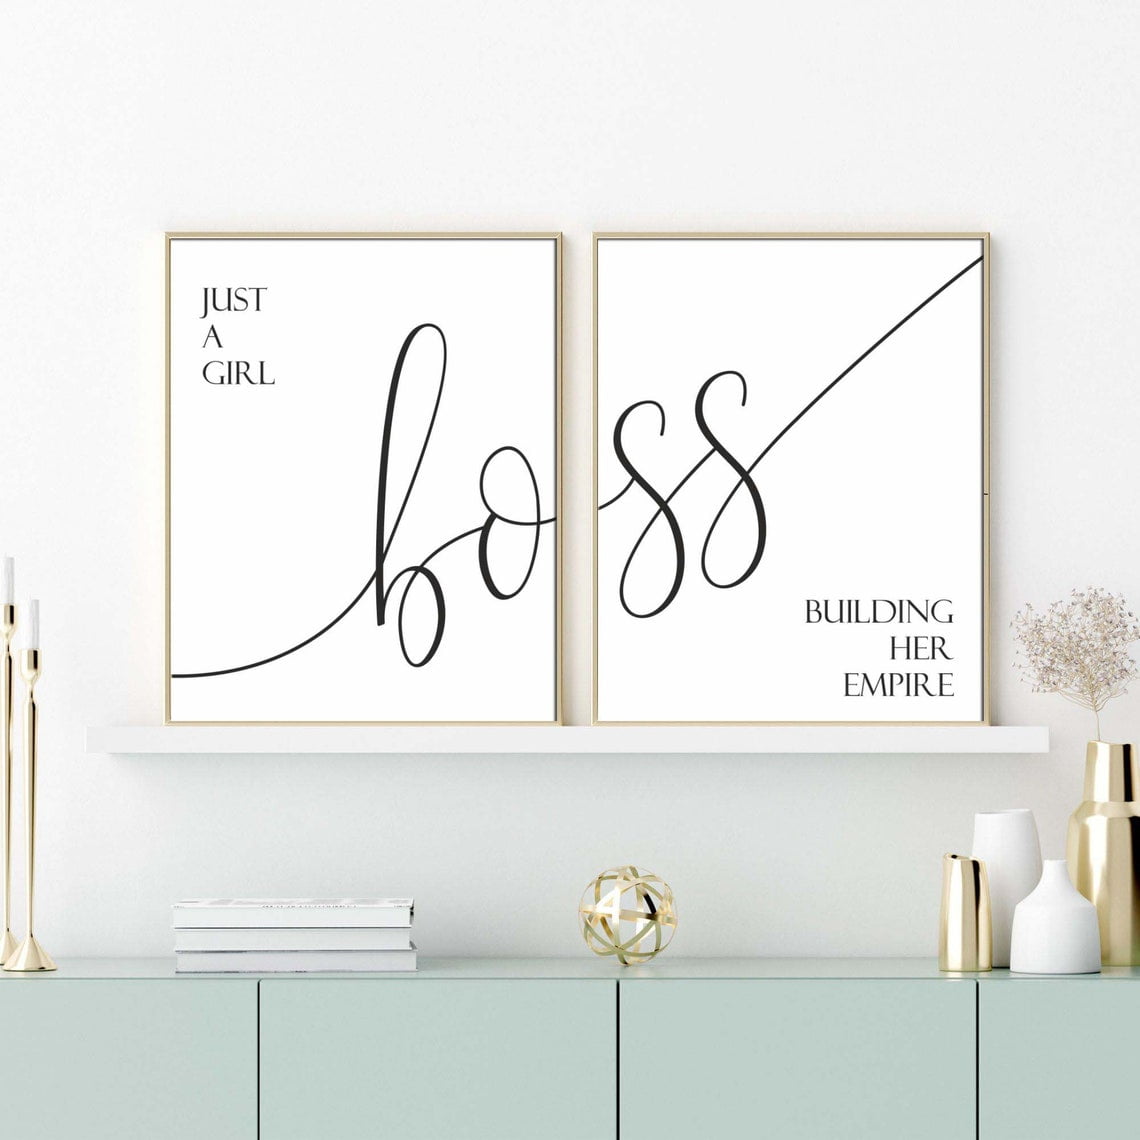 Set of 2 Canvas Prints Girl Painting Office Boss Boss For New Just Gift Her Building for A Art Unframed Empire Poster Decor Office Wall Lady